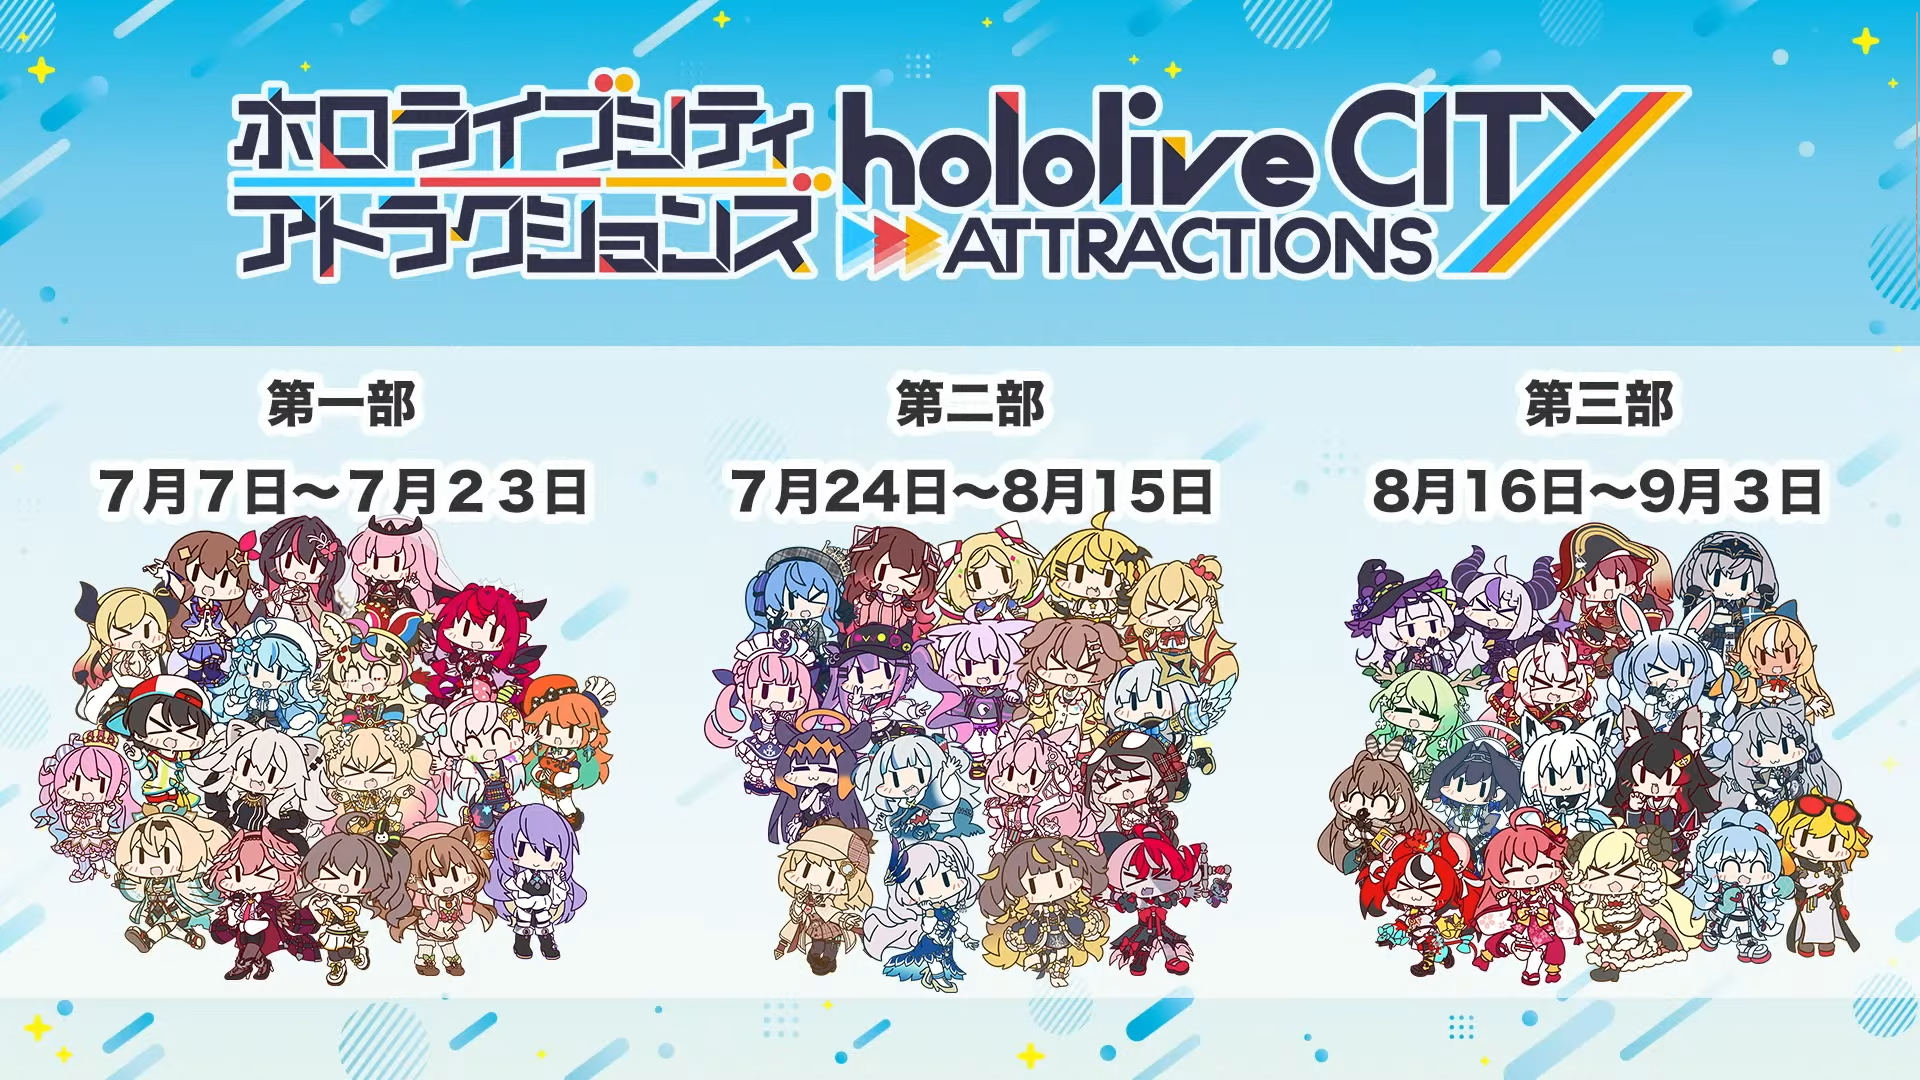 hololive-city-attractions-timeframes.png